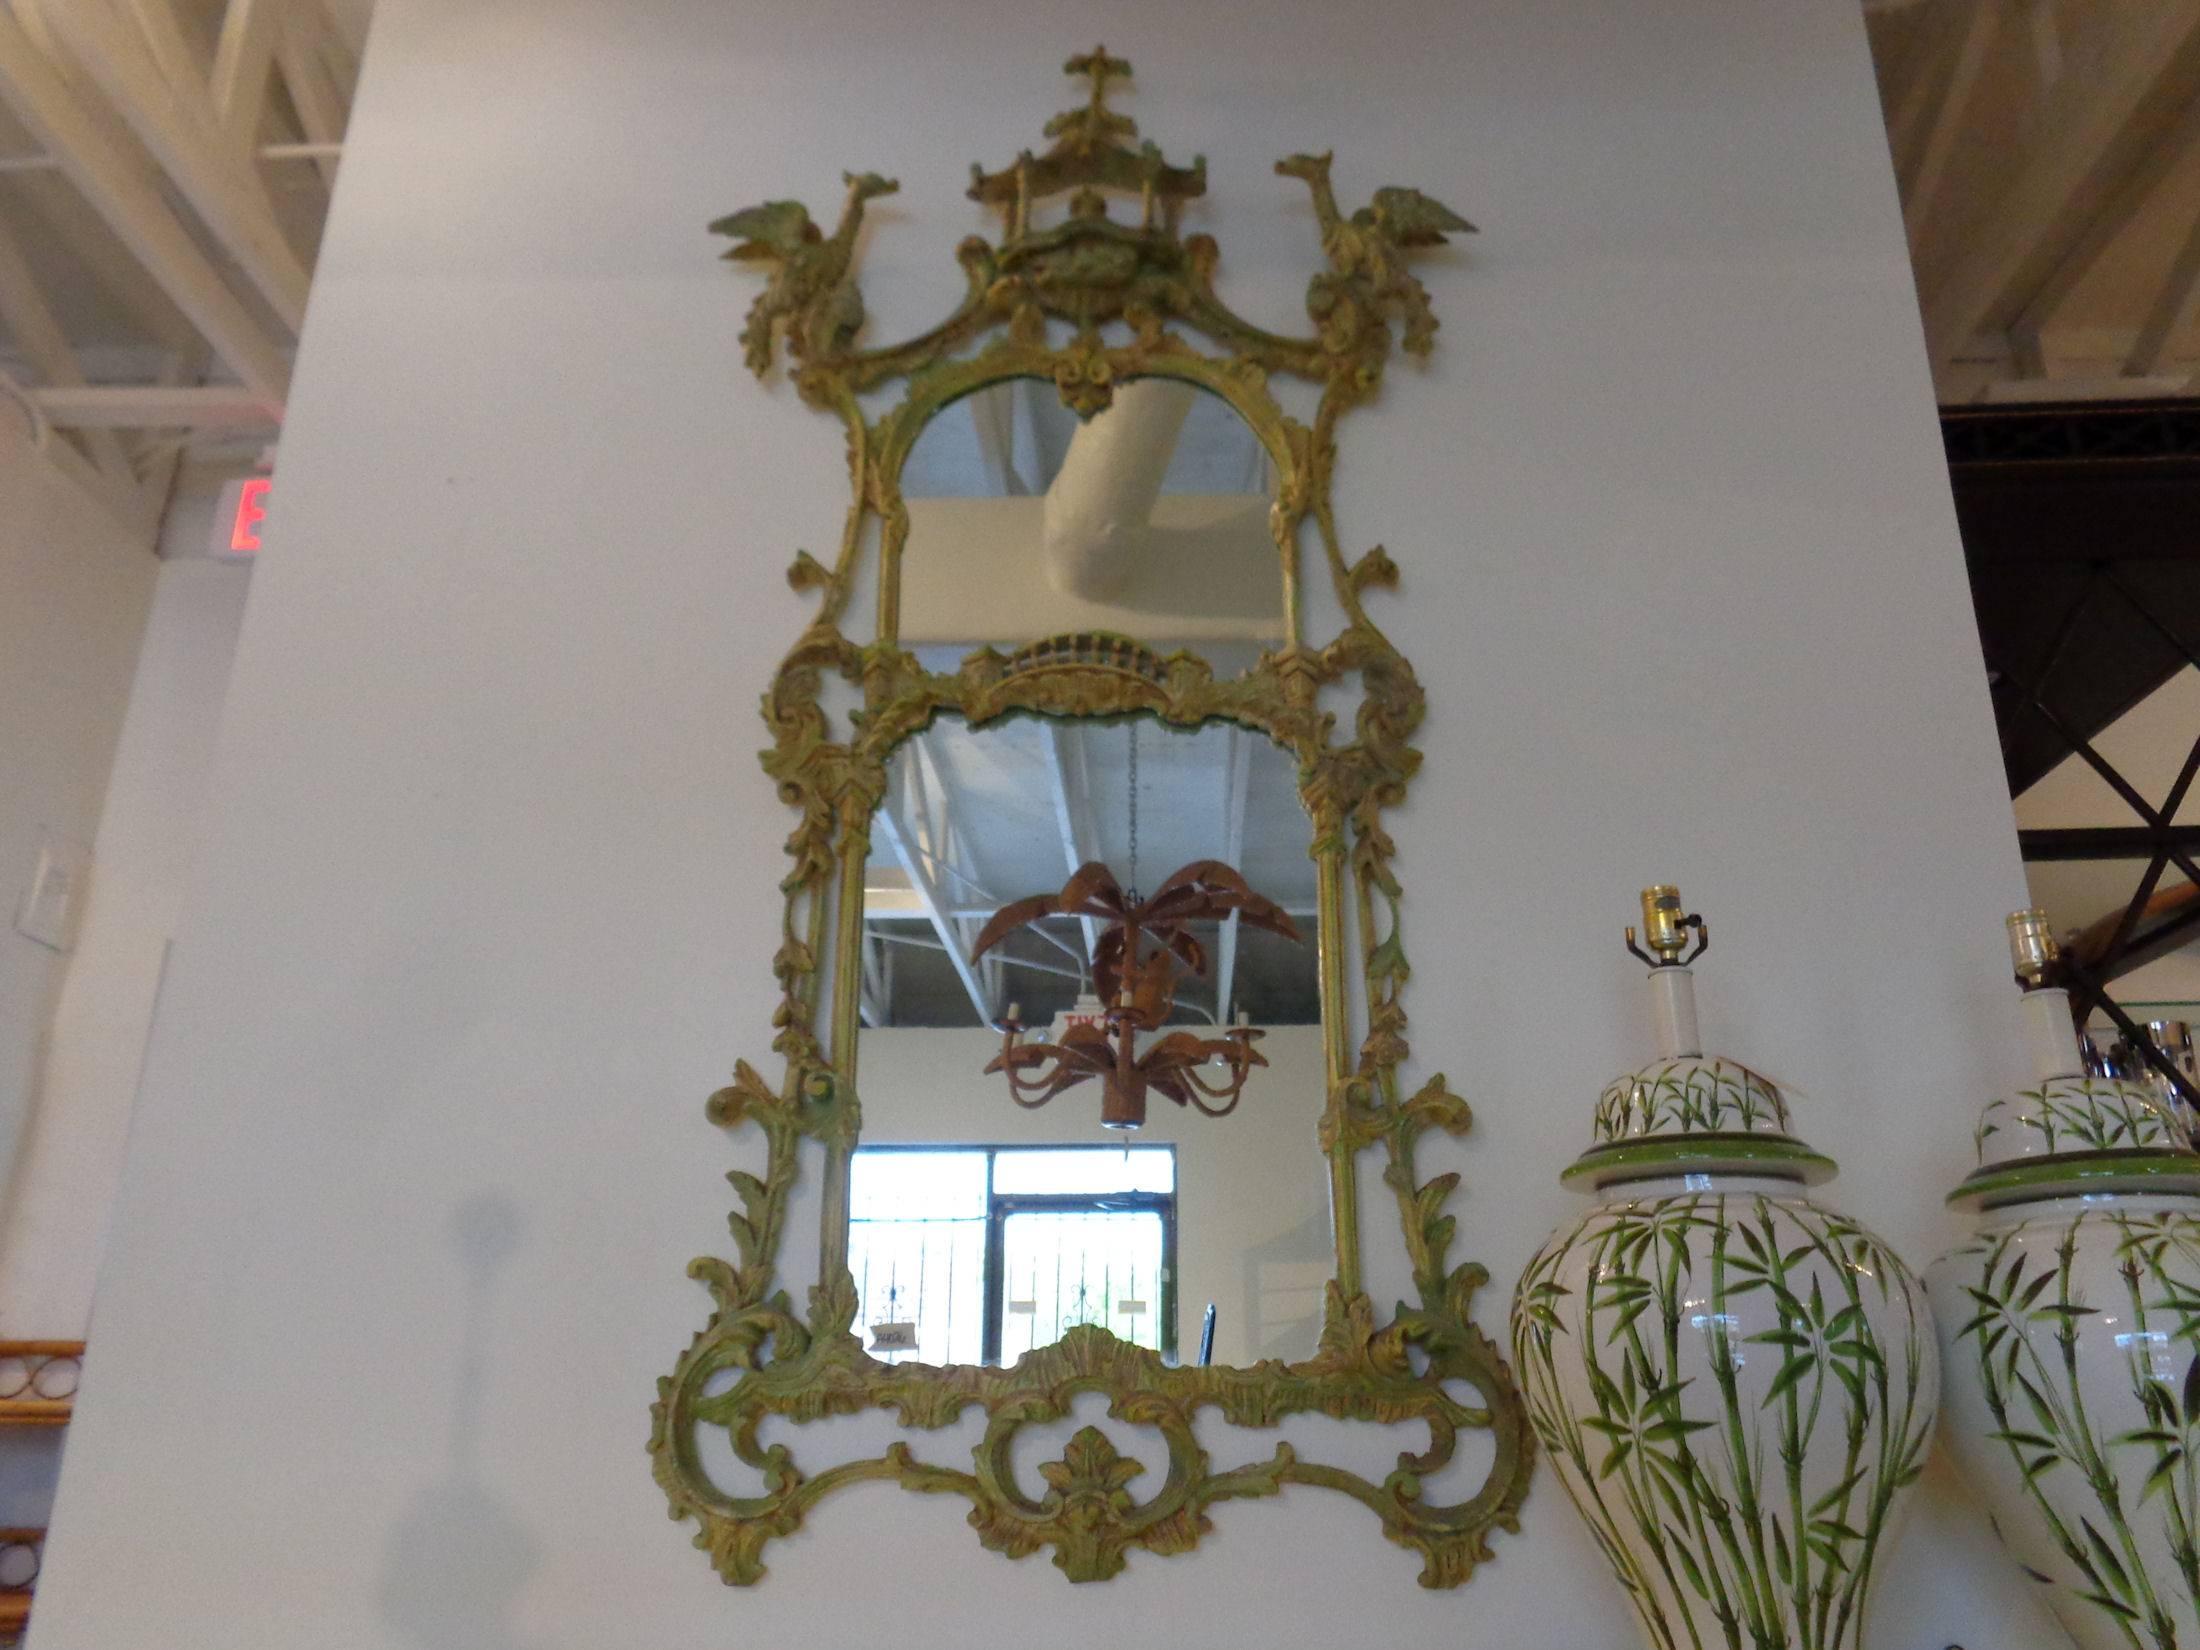 Hollywood Regency Chippendale style mirror in nice as found vintage condition. There are scuffs and scrapes to the as found finish.